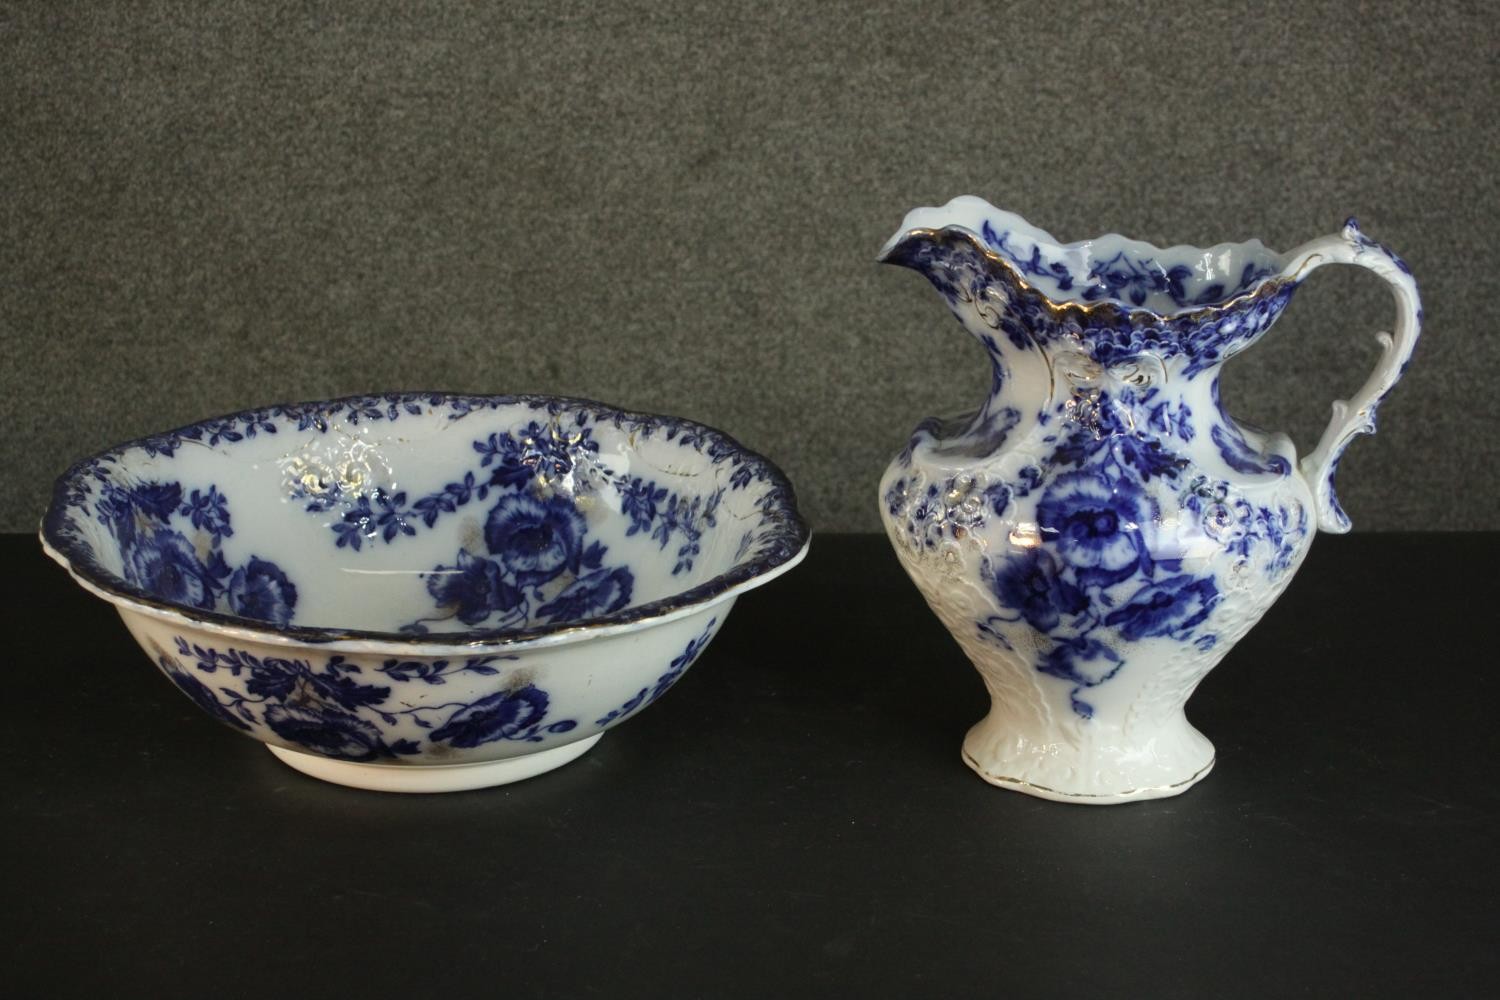 A Ford & Sons pottery 'Laurel' pattern china wash jug and basin, with blue transfer printed poppies.